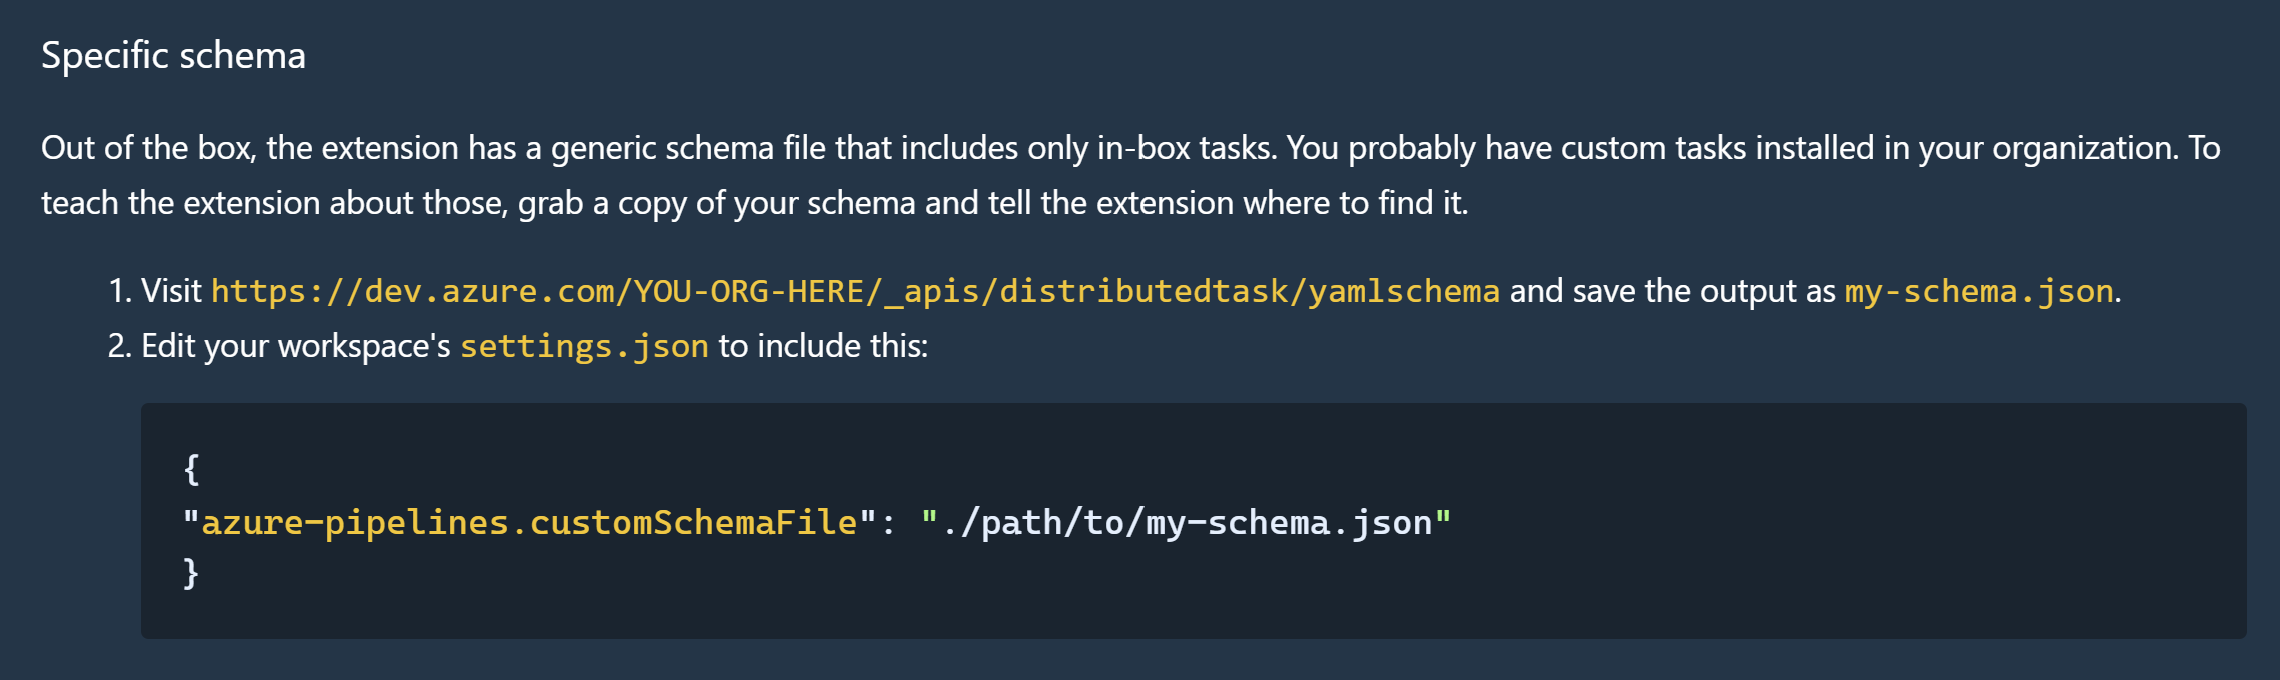 Documentation of the Azure Pipelines vscode extension about YAML schema.